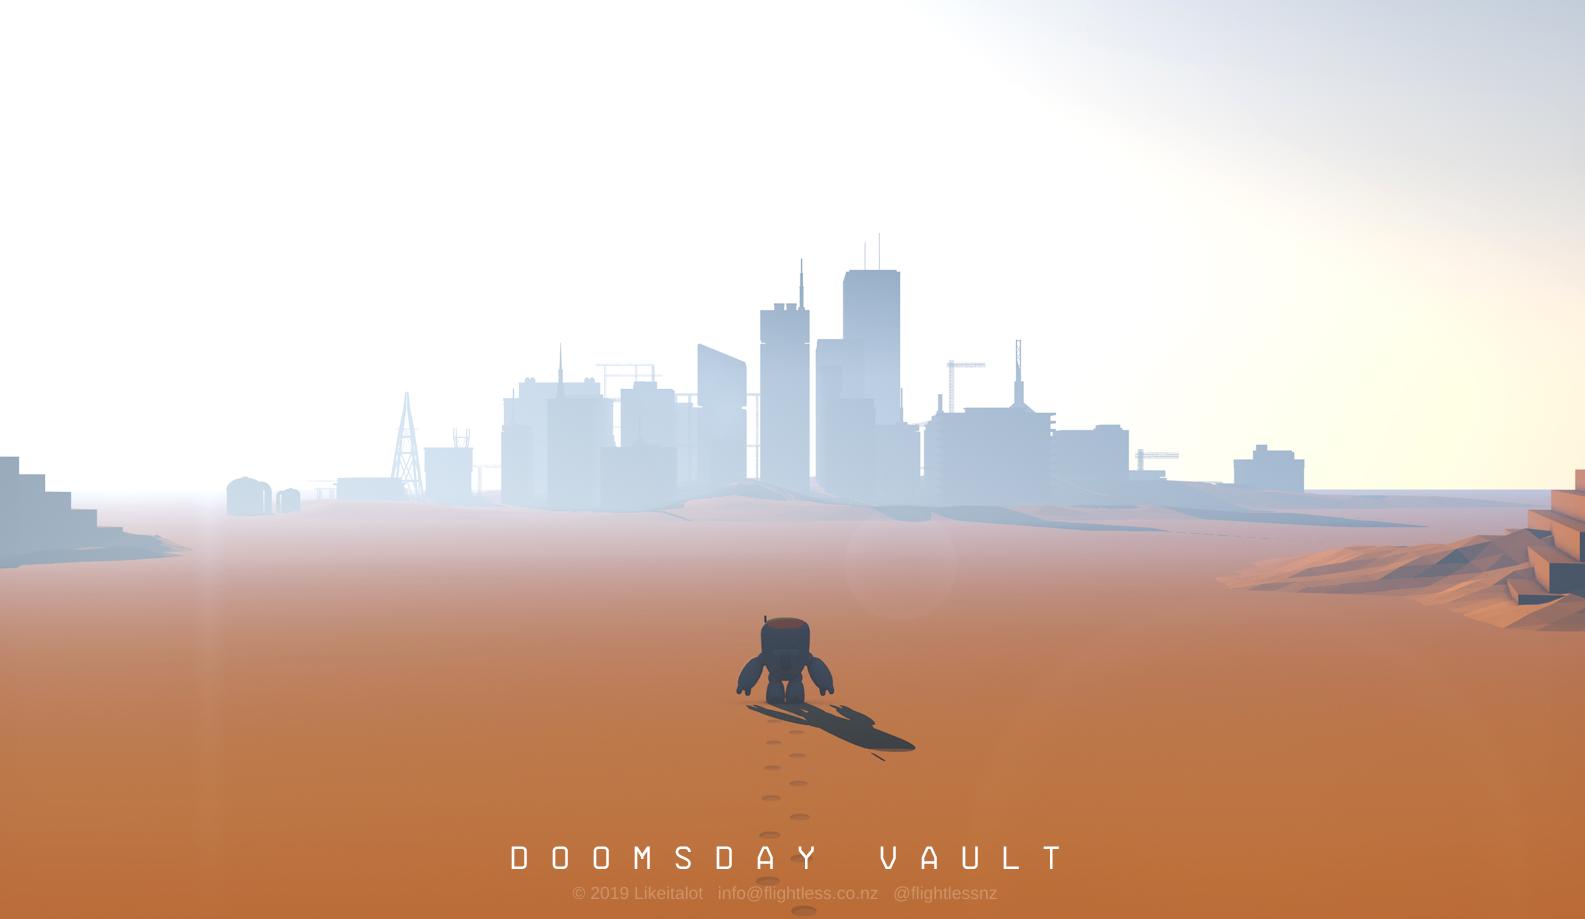 Doomsday Vault, a post-apocalyptic adventure, now available on Apple Arcade